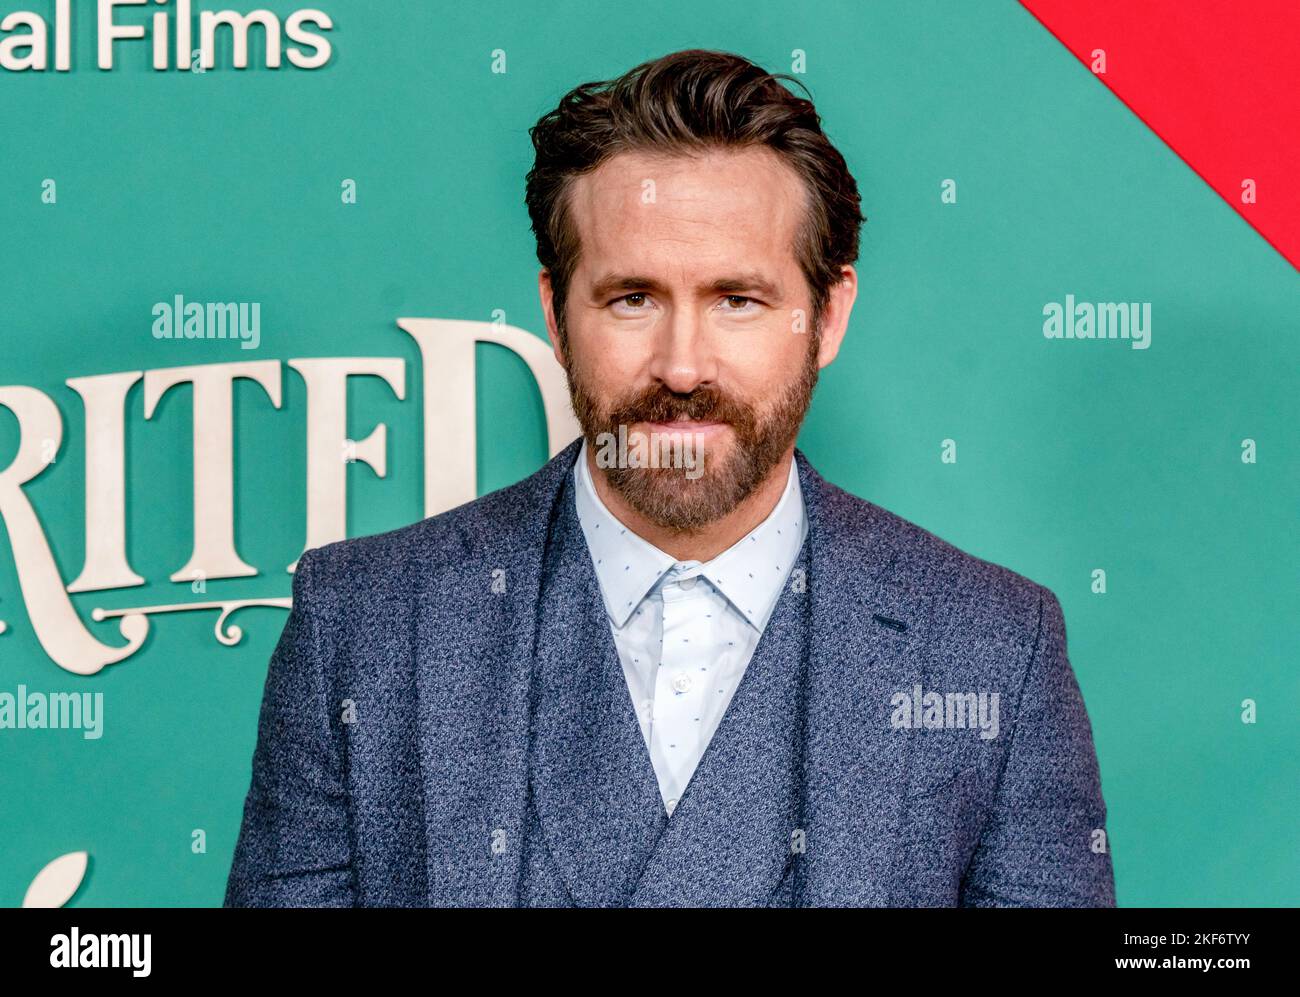 https://c8.alamy.com/comp/2KF6TYY/ryan-reynolds-attends-premiere-by-apple-original-films-spirited-at-alice-tully-hall-in-new-york-on-november-7-2022-2KF6TYY.jpg